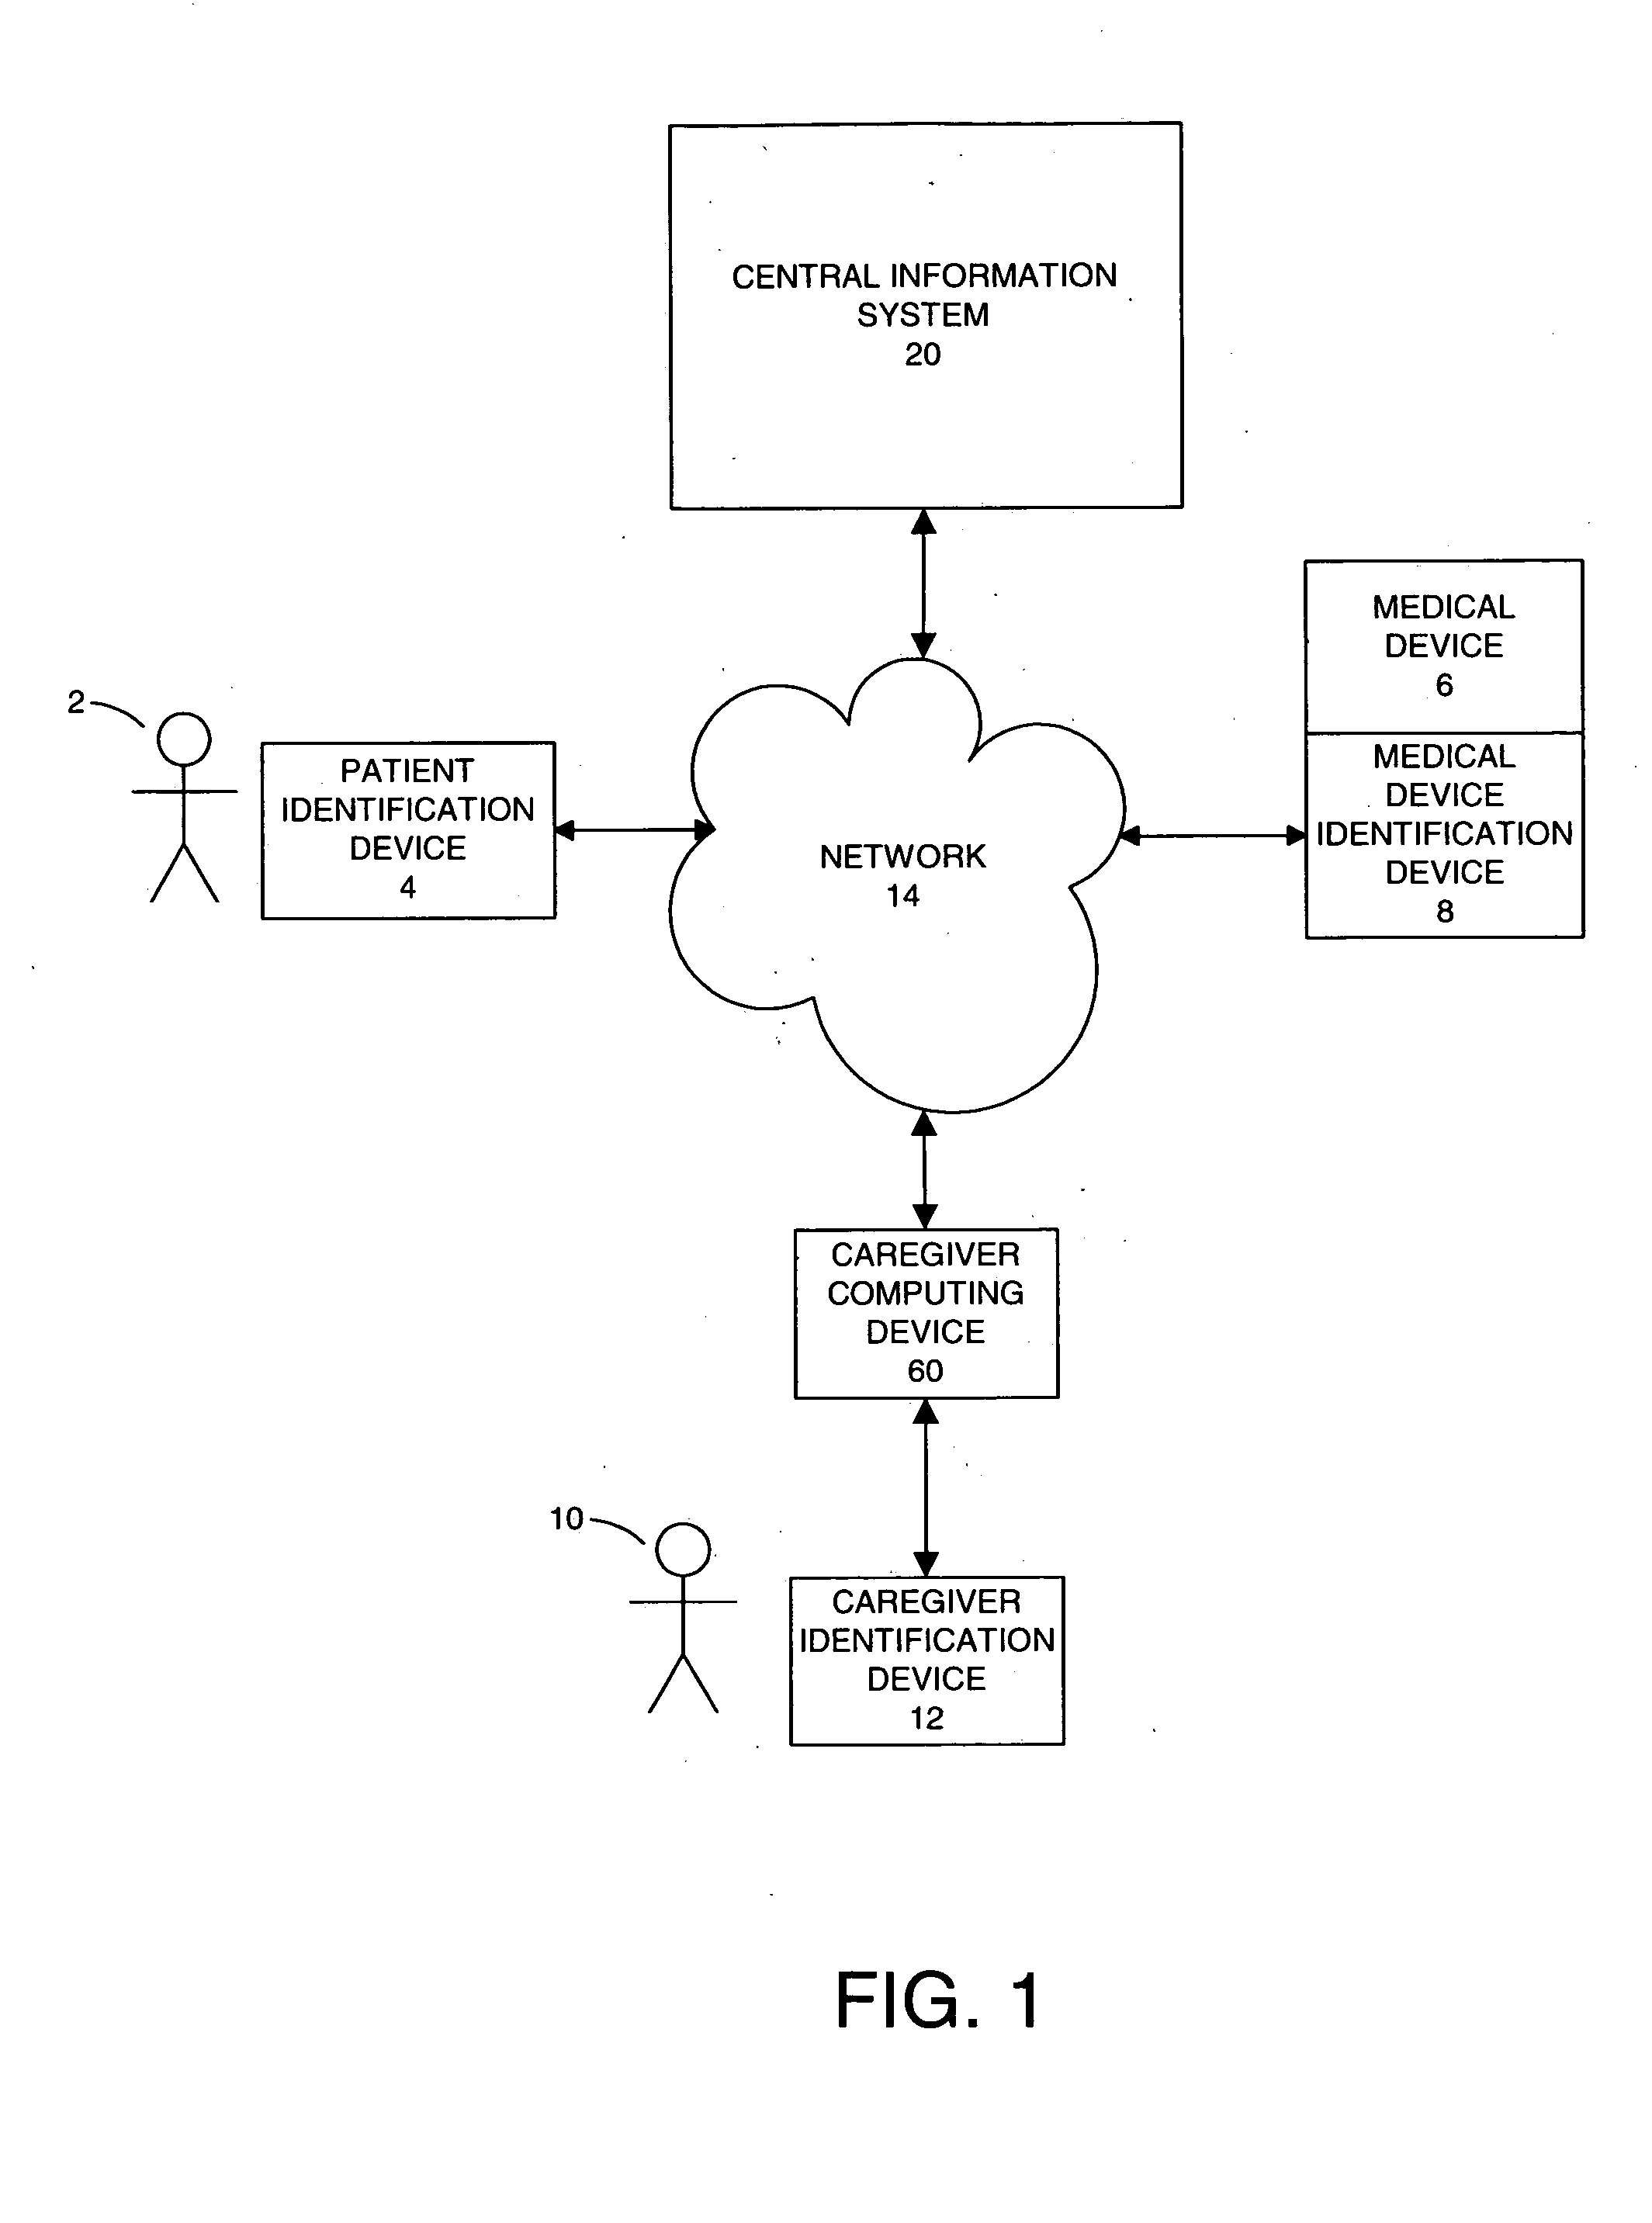 Task-based system and method for managing patient care through automated recognition